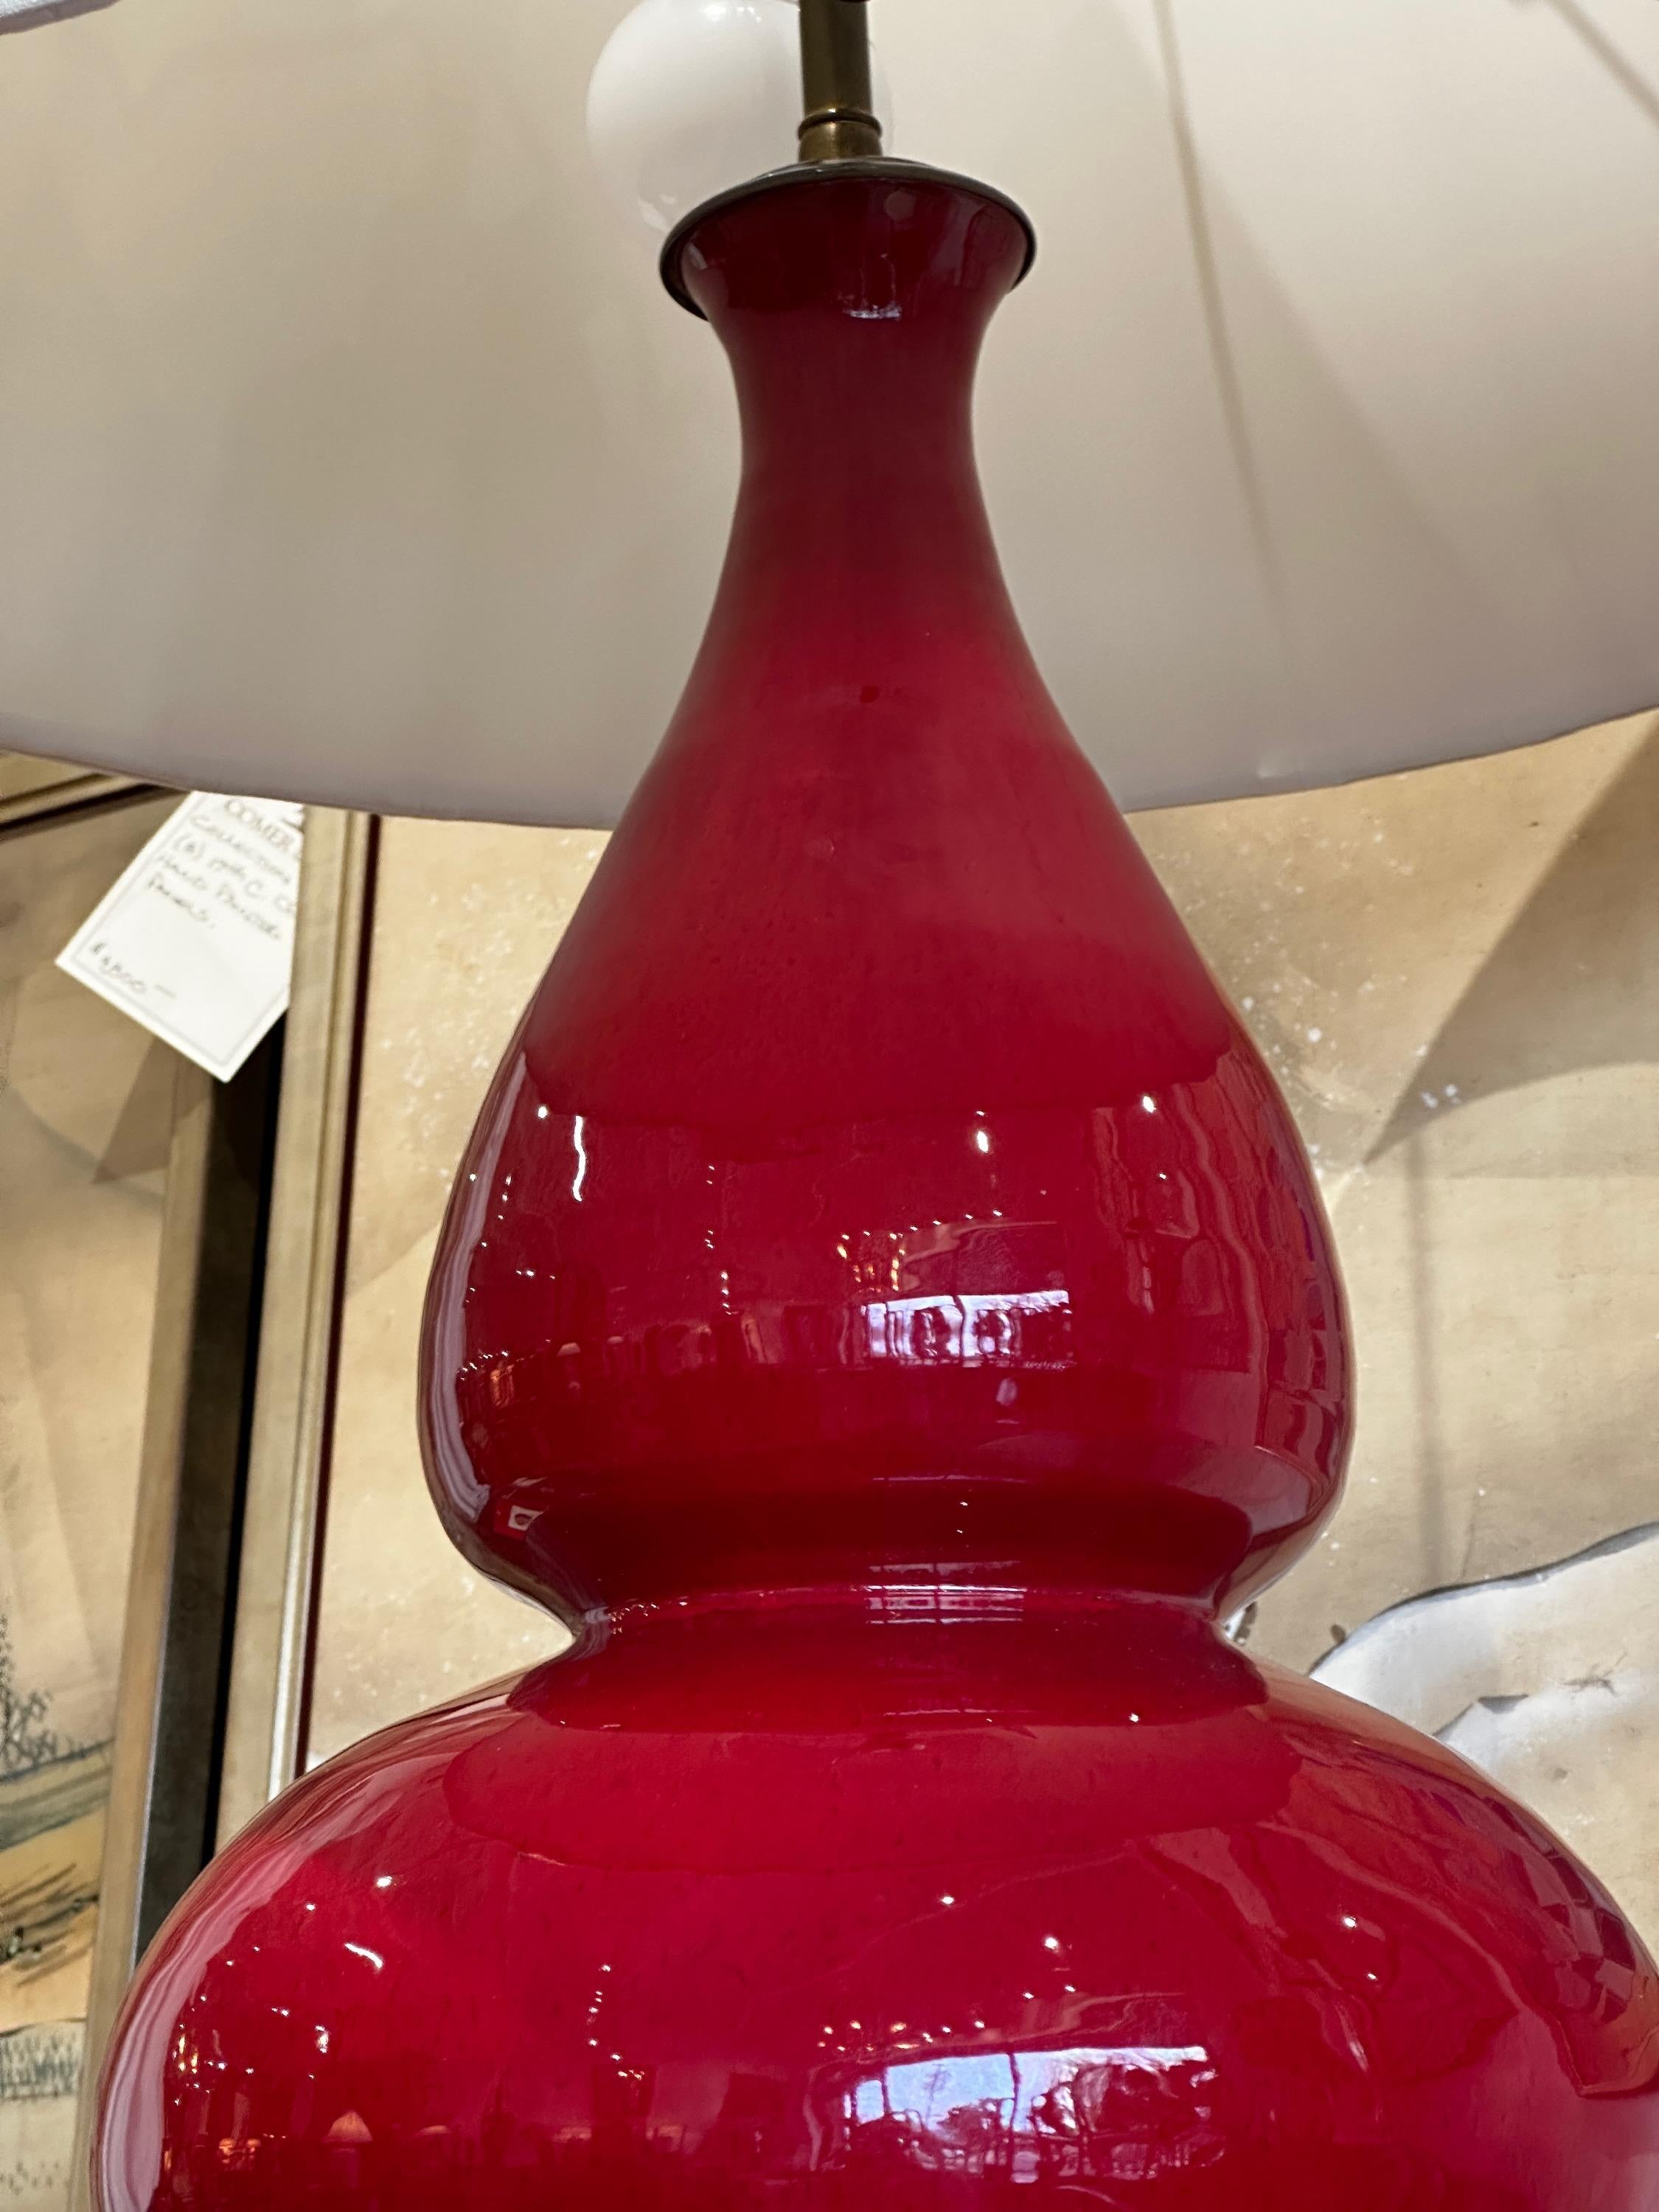 American Hand Thrown Double Gourd Red Glazed Table Lamp For Sale